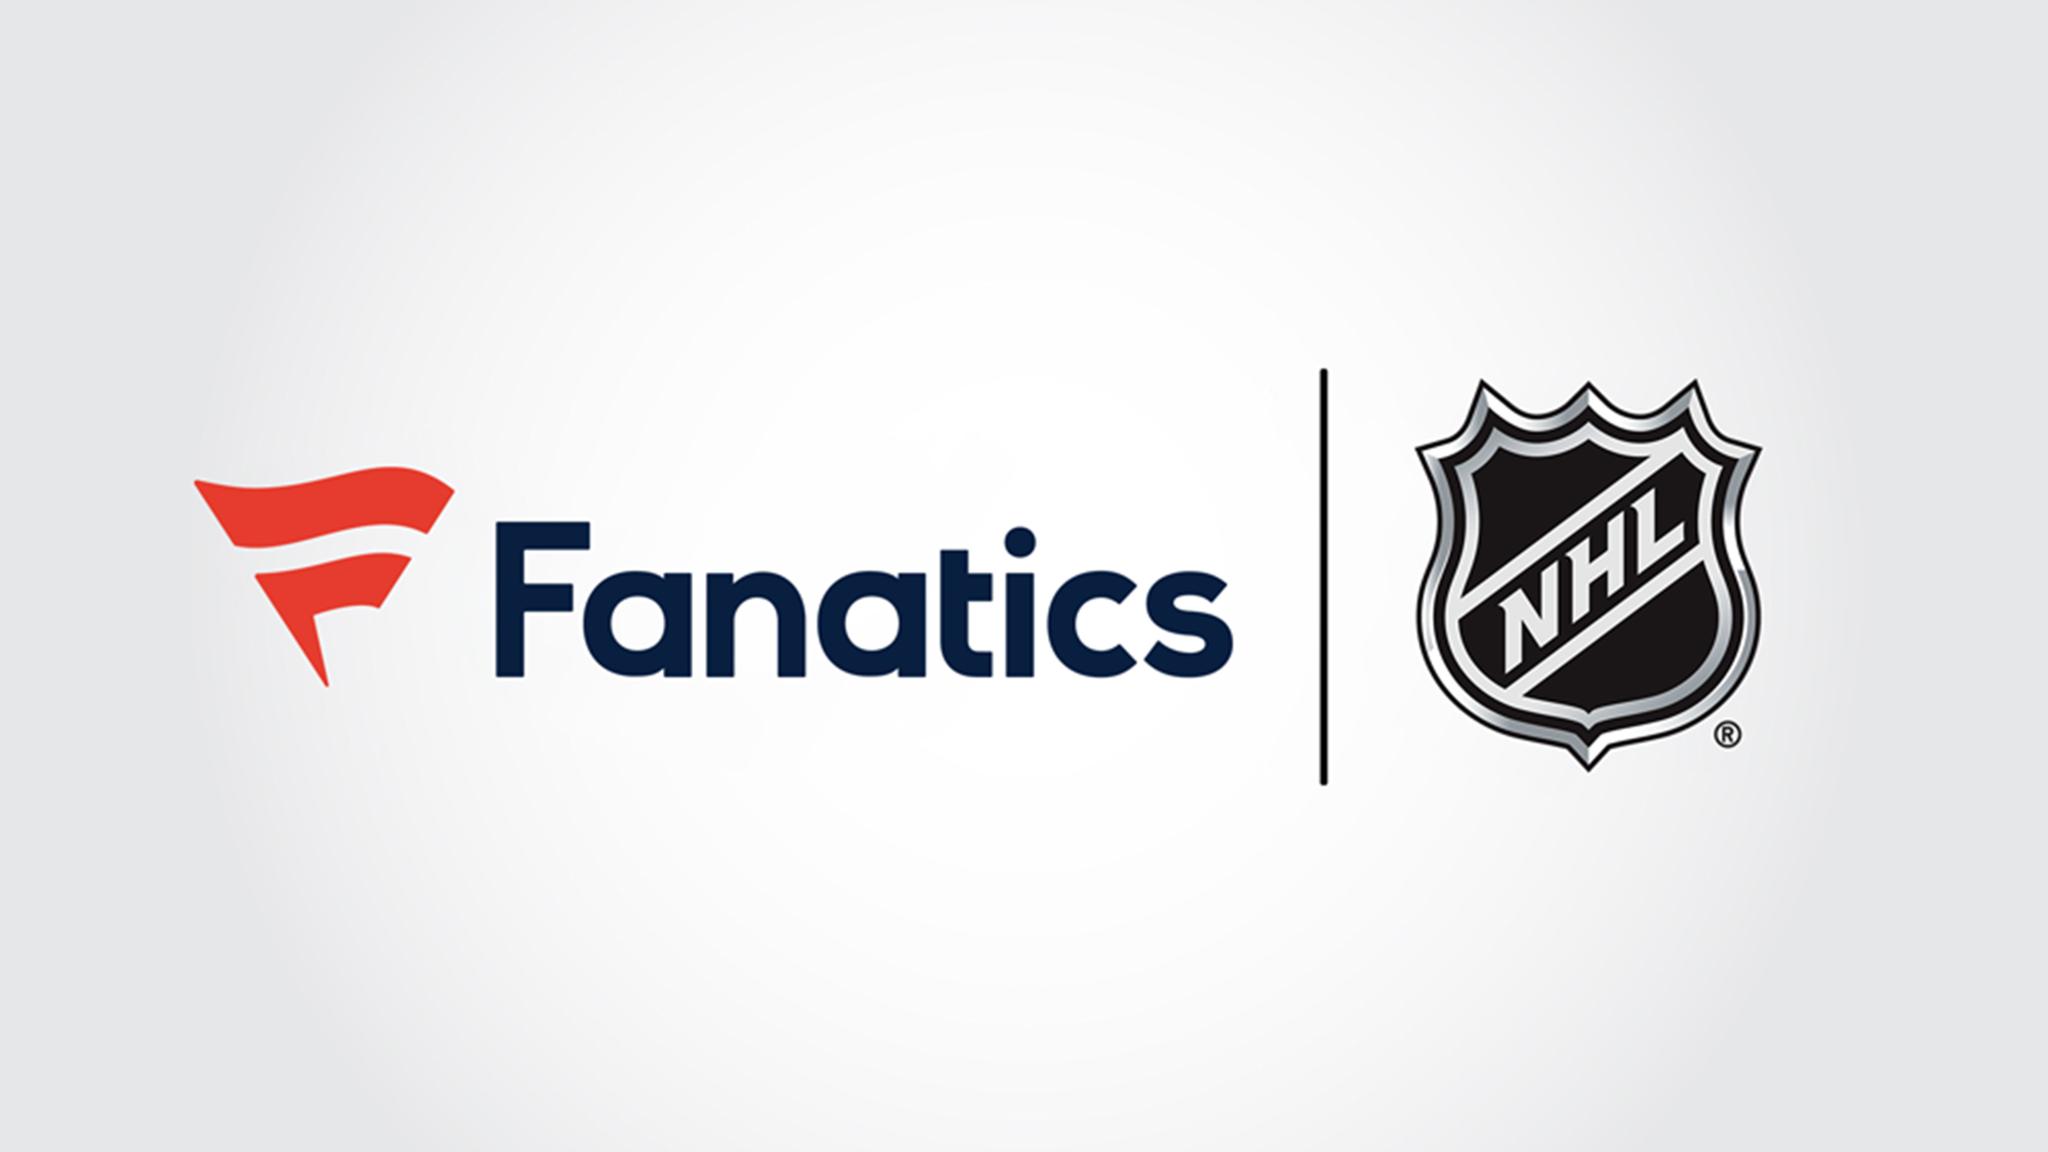 Fanatics to become official on-ice uniform partner for the NHL in